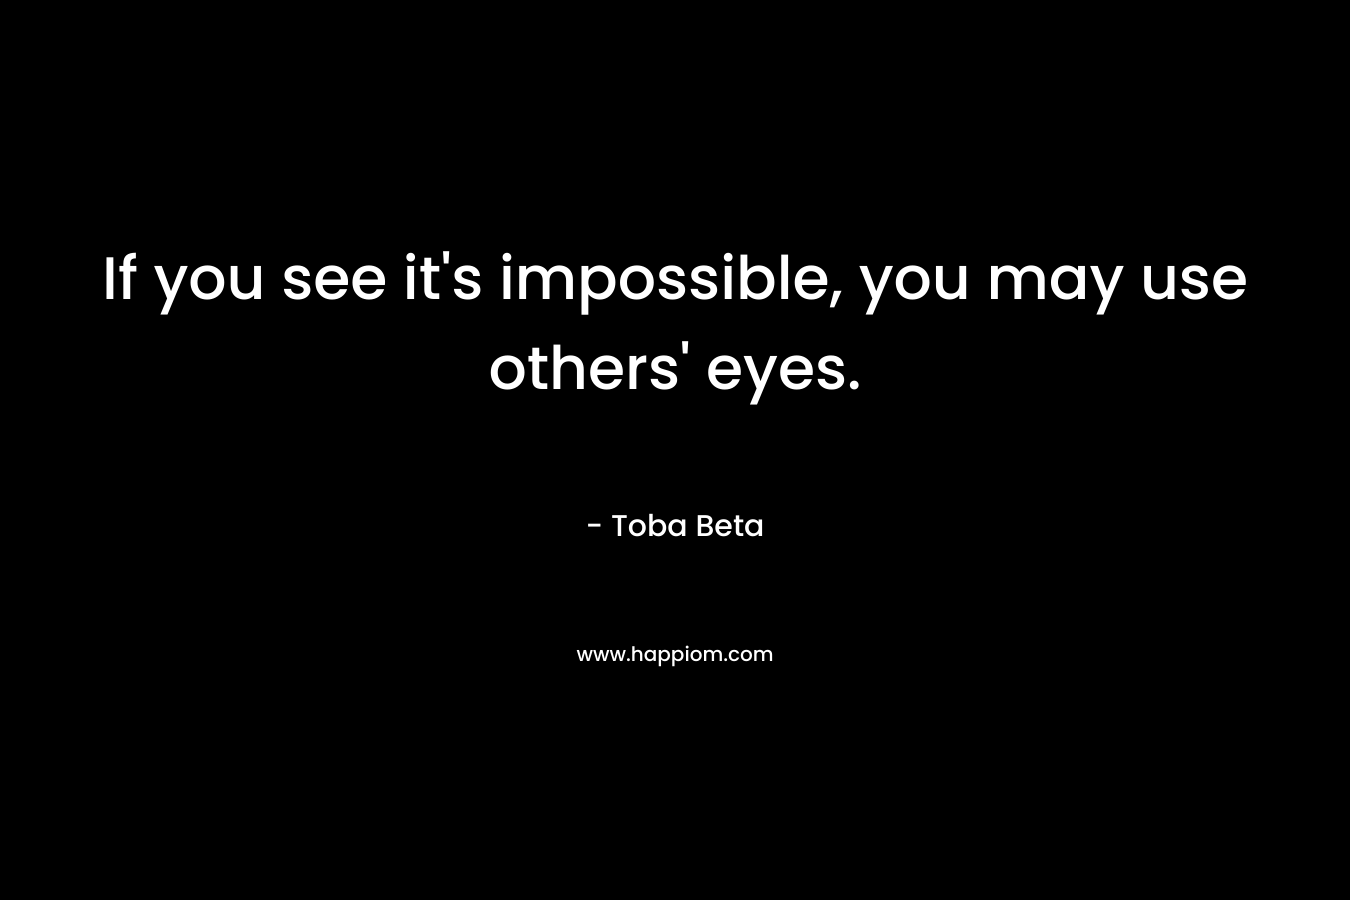 If you see it’s impossible, you may use others’ eyes. – Toba Beta